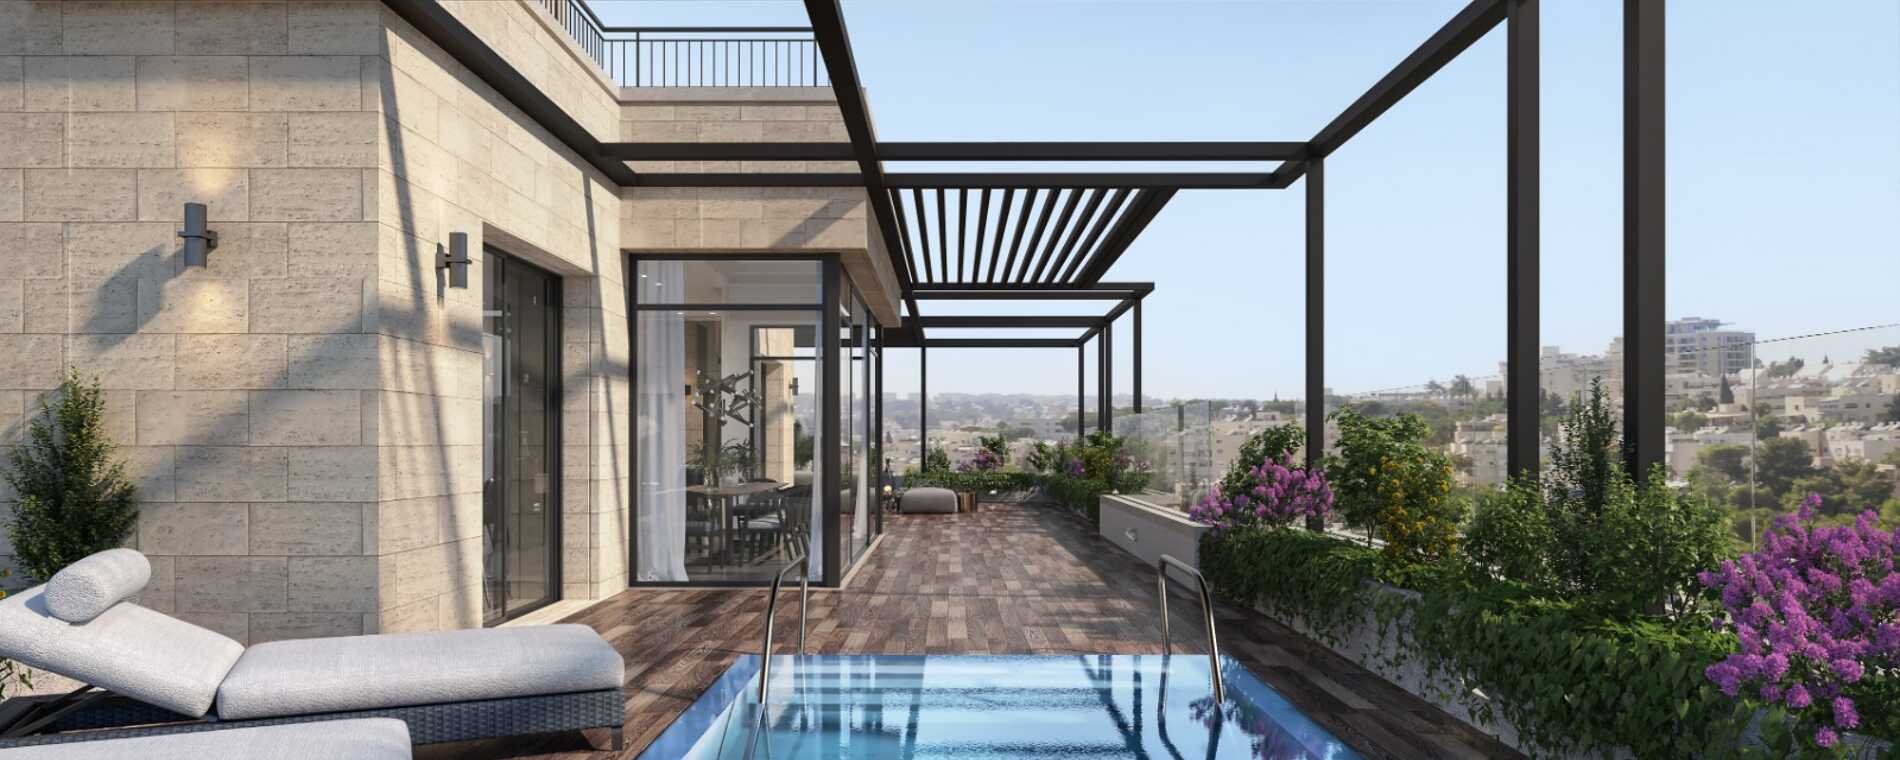 assets/images/properties/Whyndham Deedes Penthouse_Terrace pool.jpeg